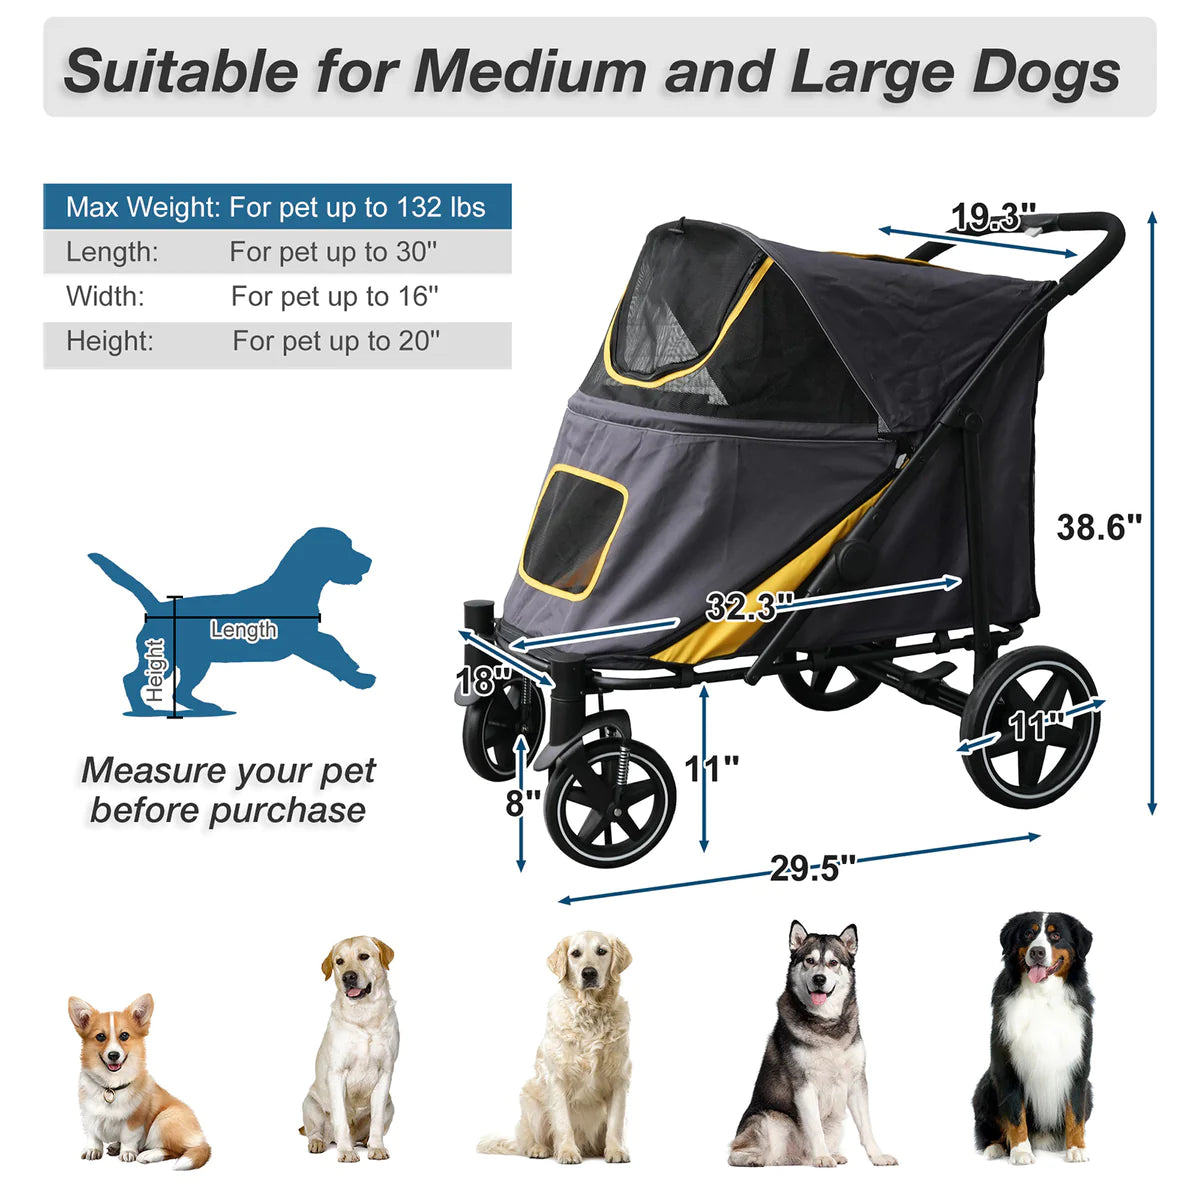 Foldable Pet Stroller Travel Carrier with Storage Pocket, Breathable Mesh, Gray and Yellow